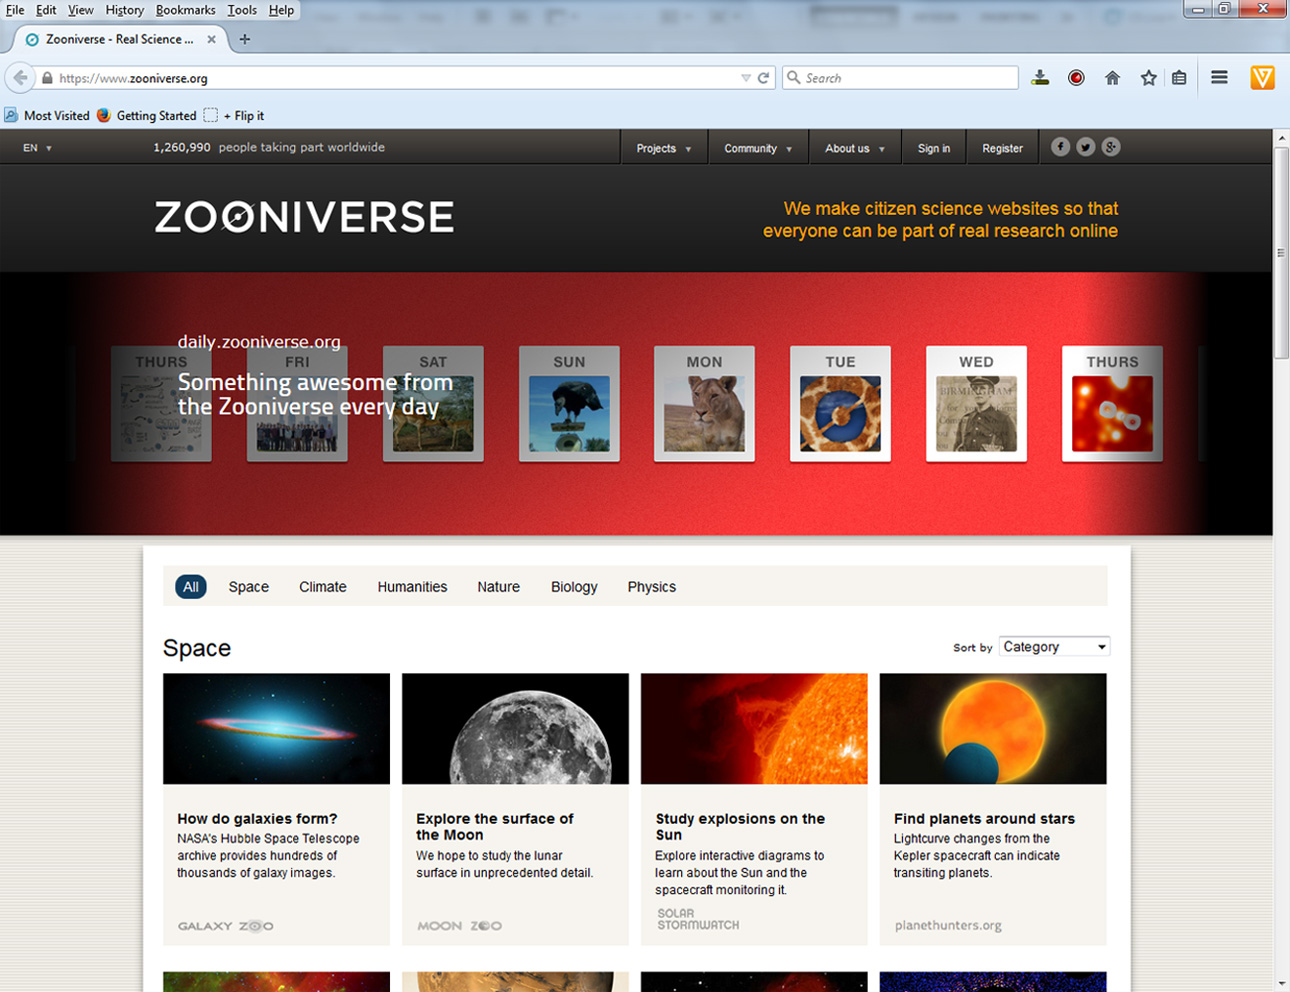 Zooniverse is the most popular platform for hosting crowd science projects, with more than 1.2 million people participating worldwide. It is operated by the Citizen Science Alliance.